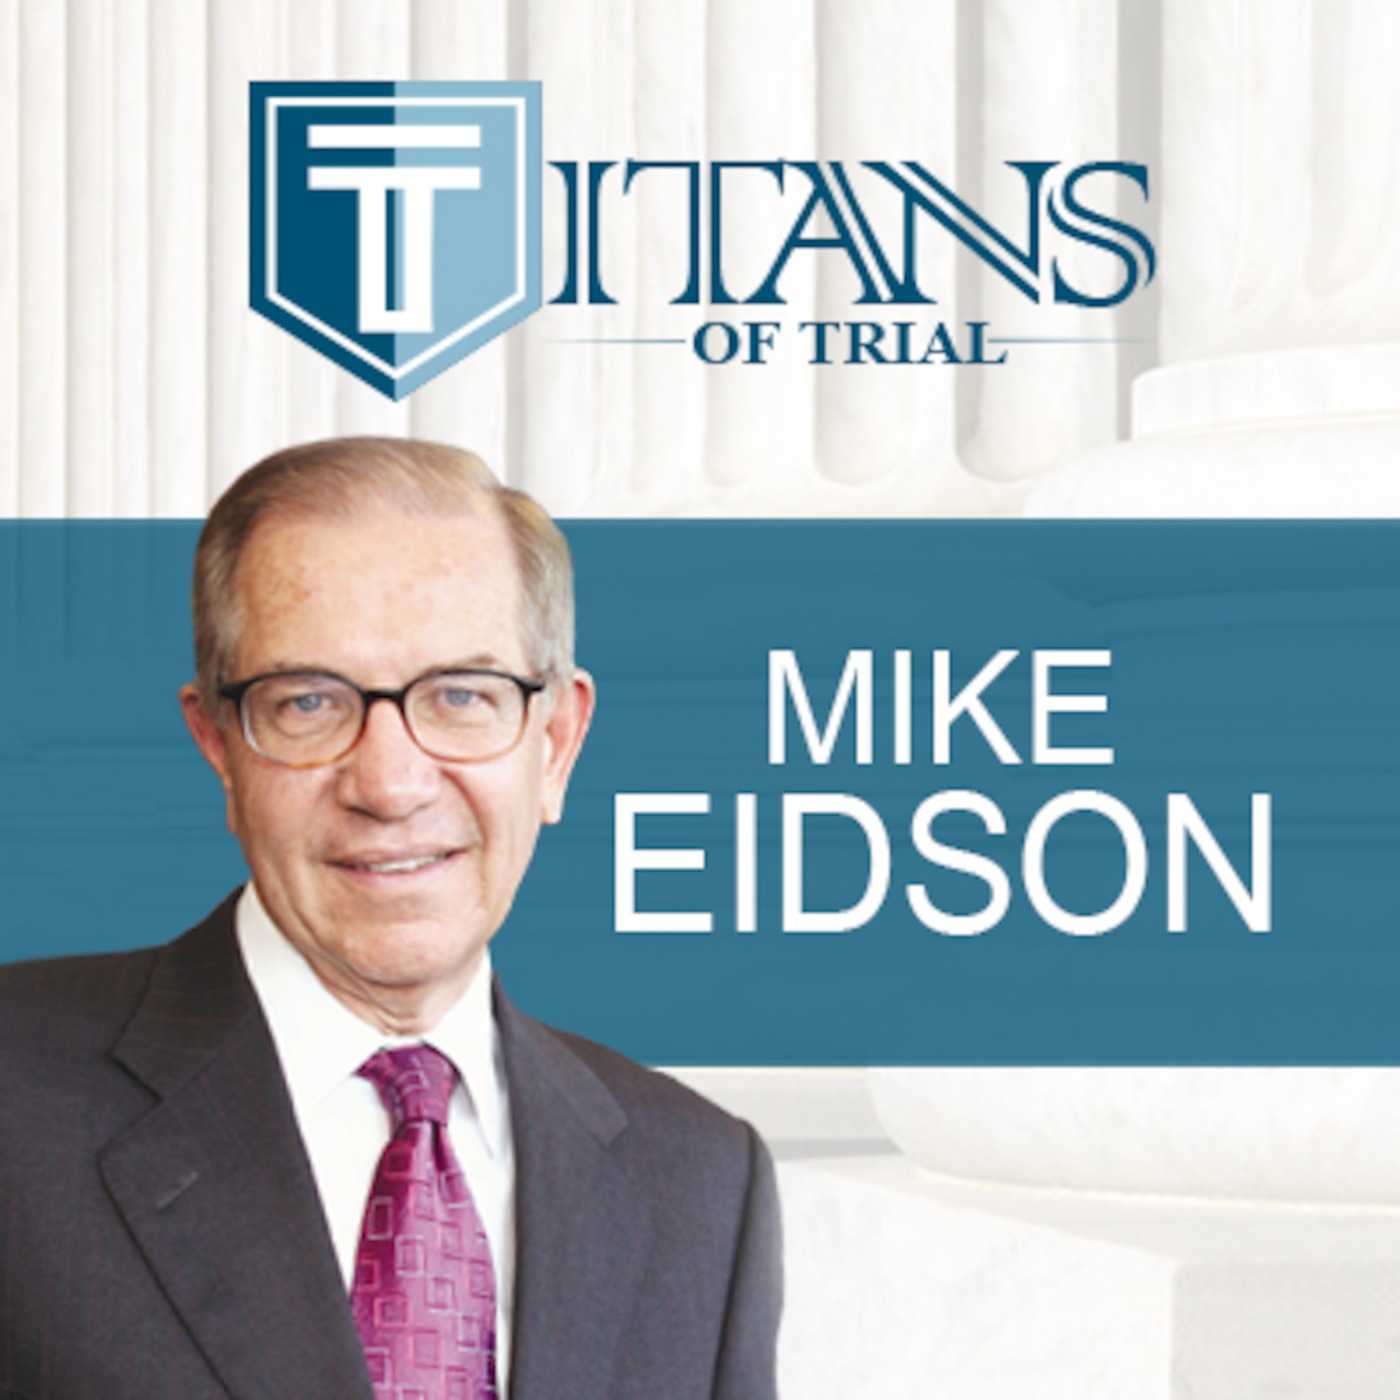 Titans of Trial - Mike Eidson